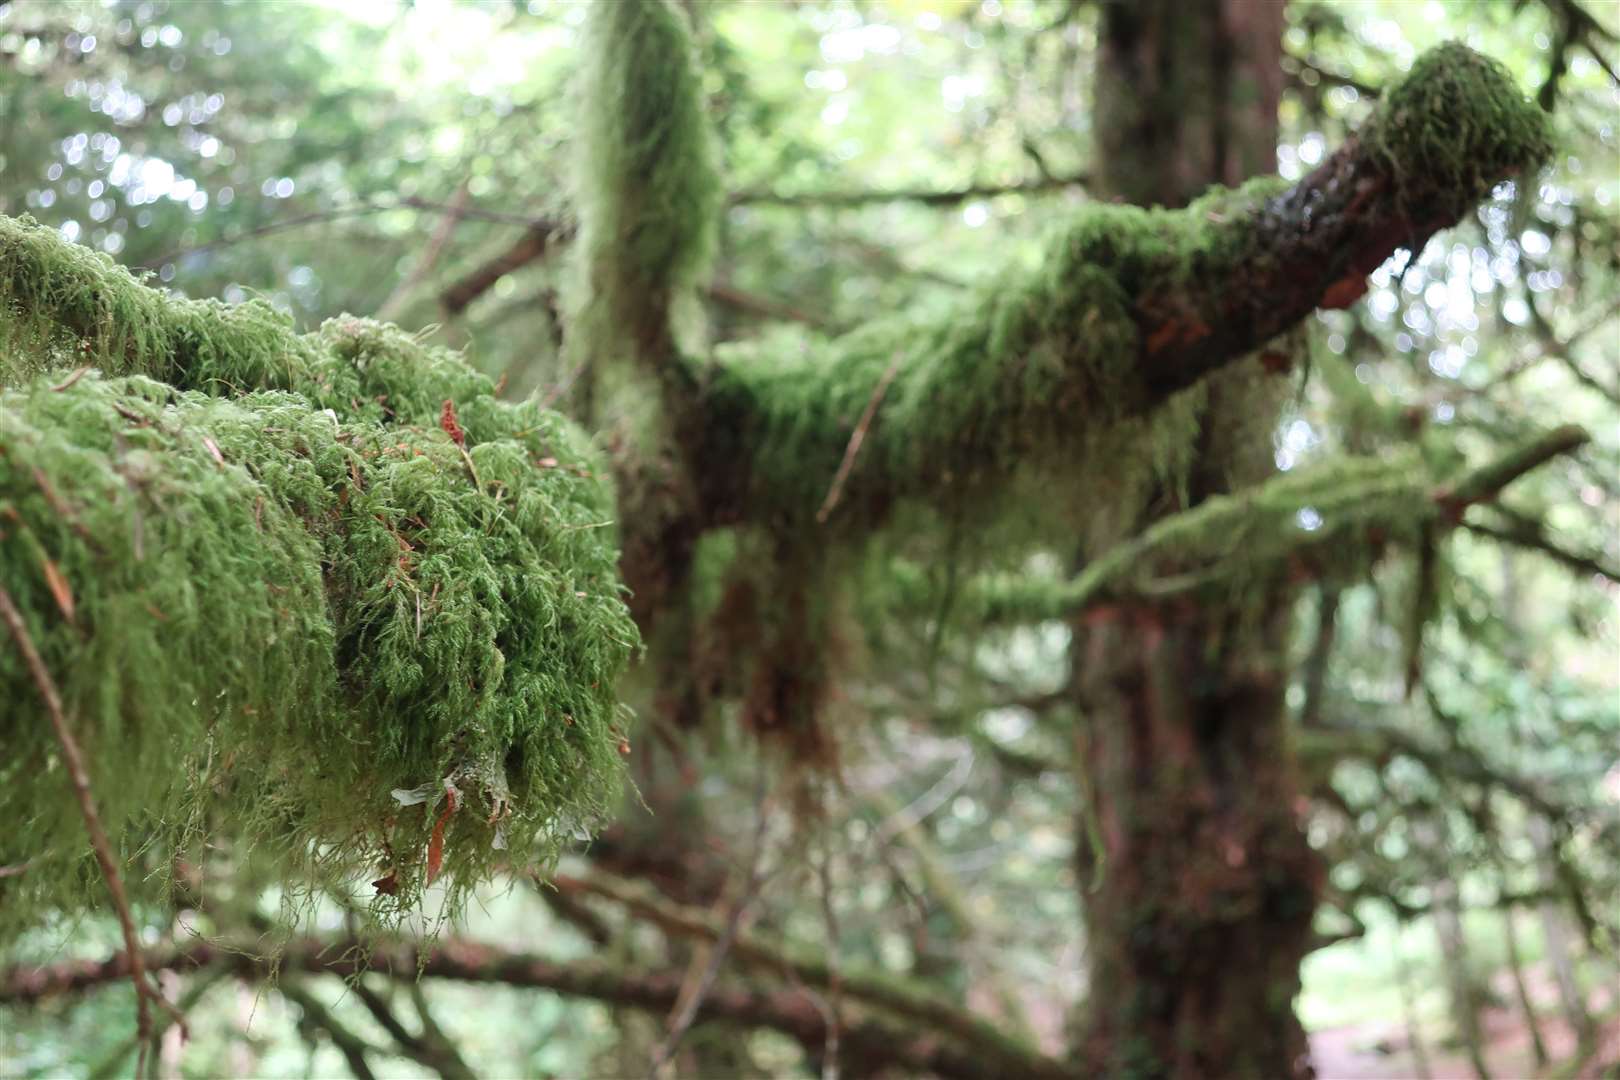 Moss drips from the trees - a number of rare species can be found here.